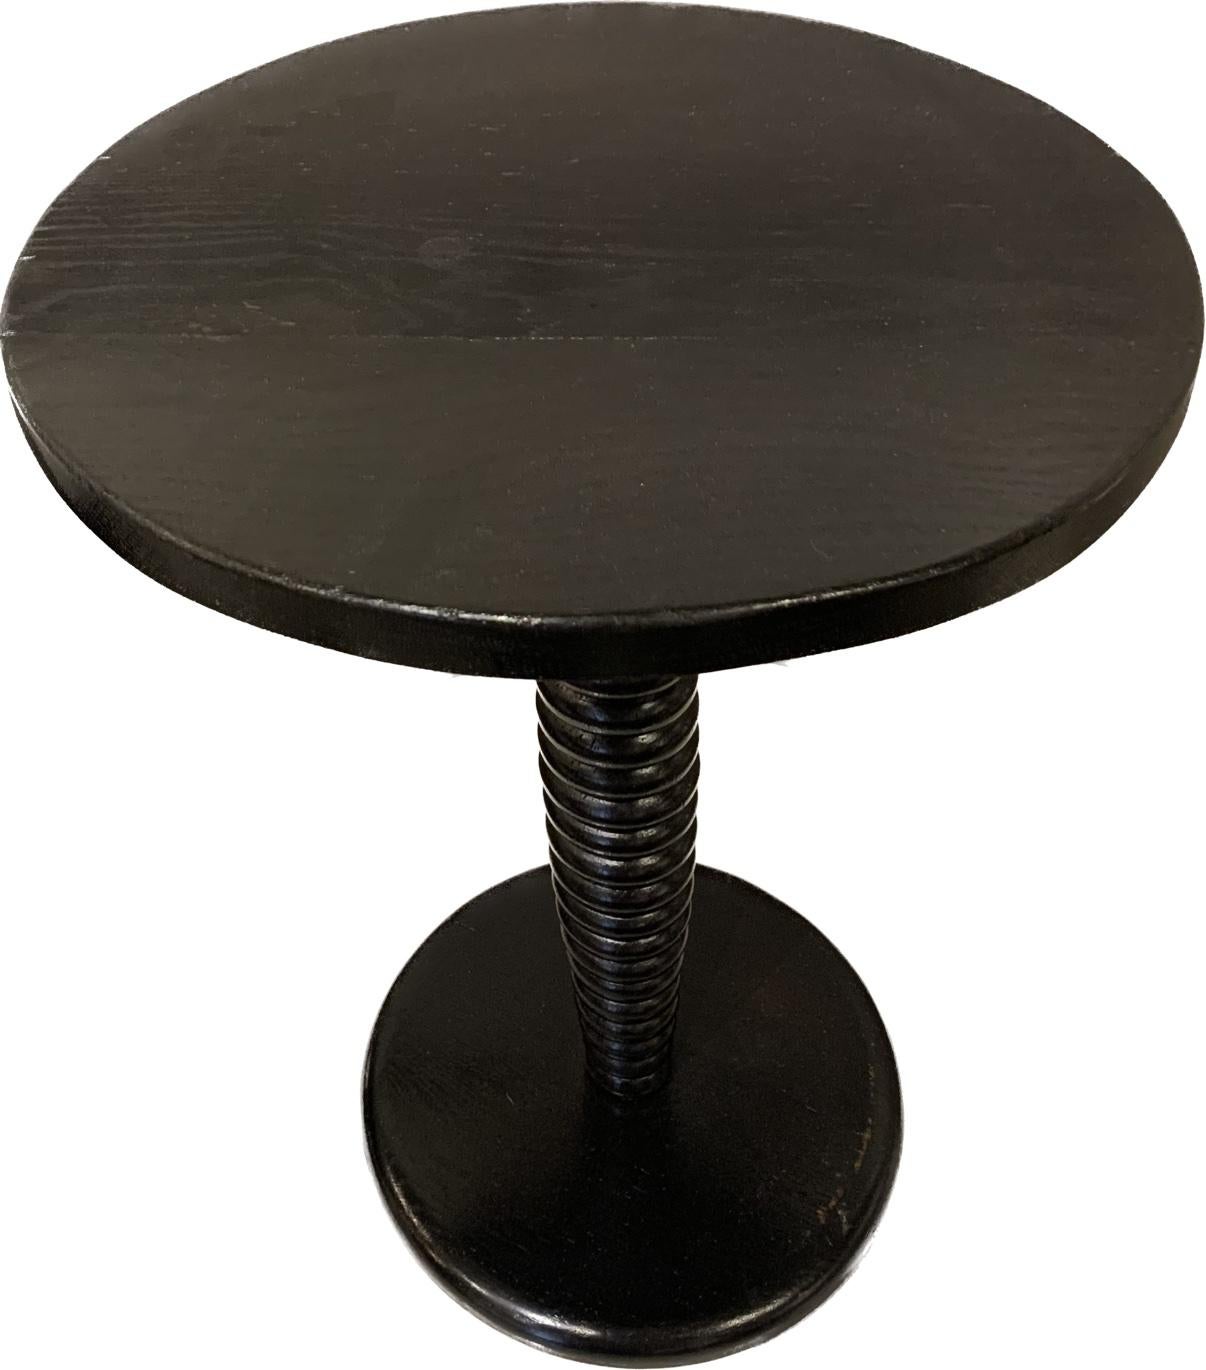 1940s French ebonized walnut side table in the style of Charles Dudouyt.
Round top.
Classic raised circular stack design pedestal.